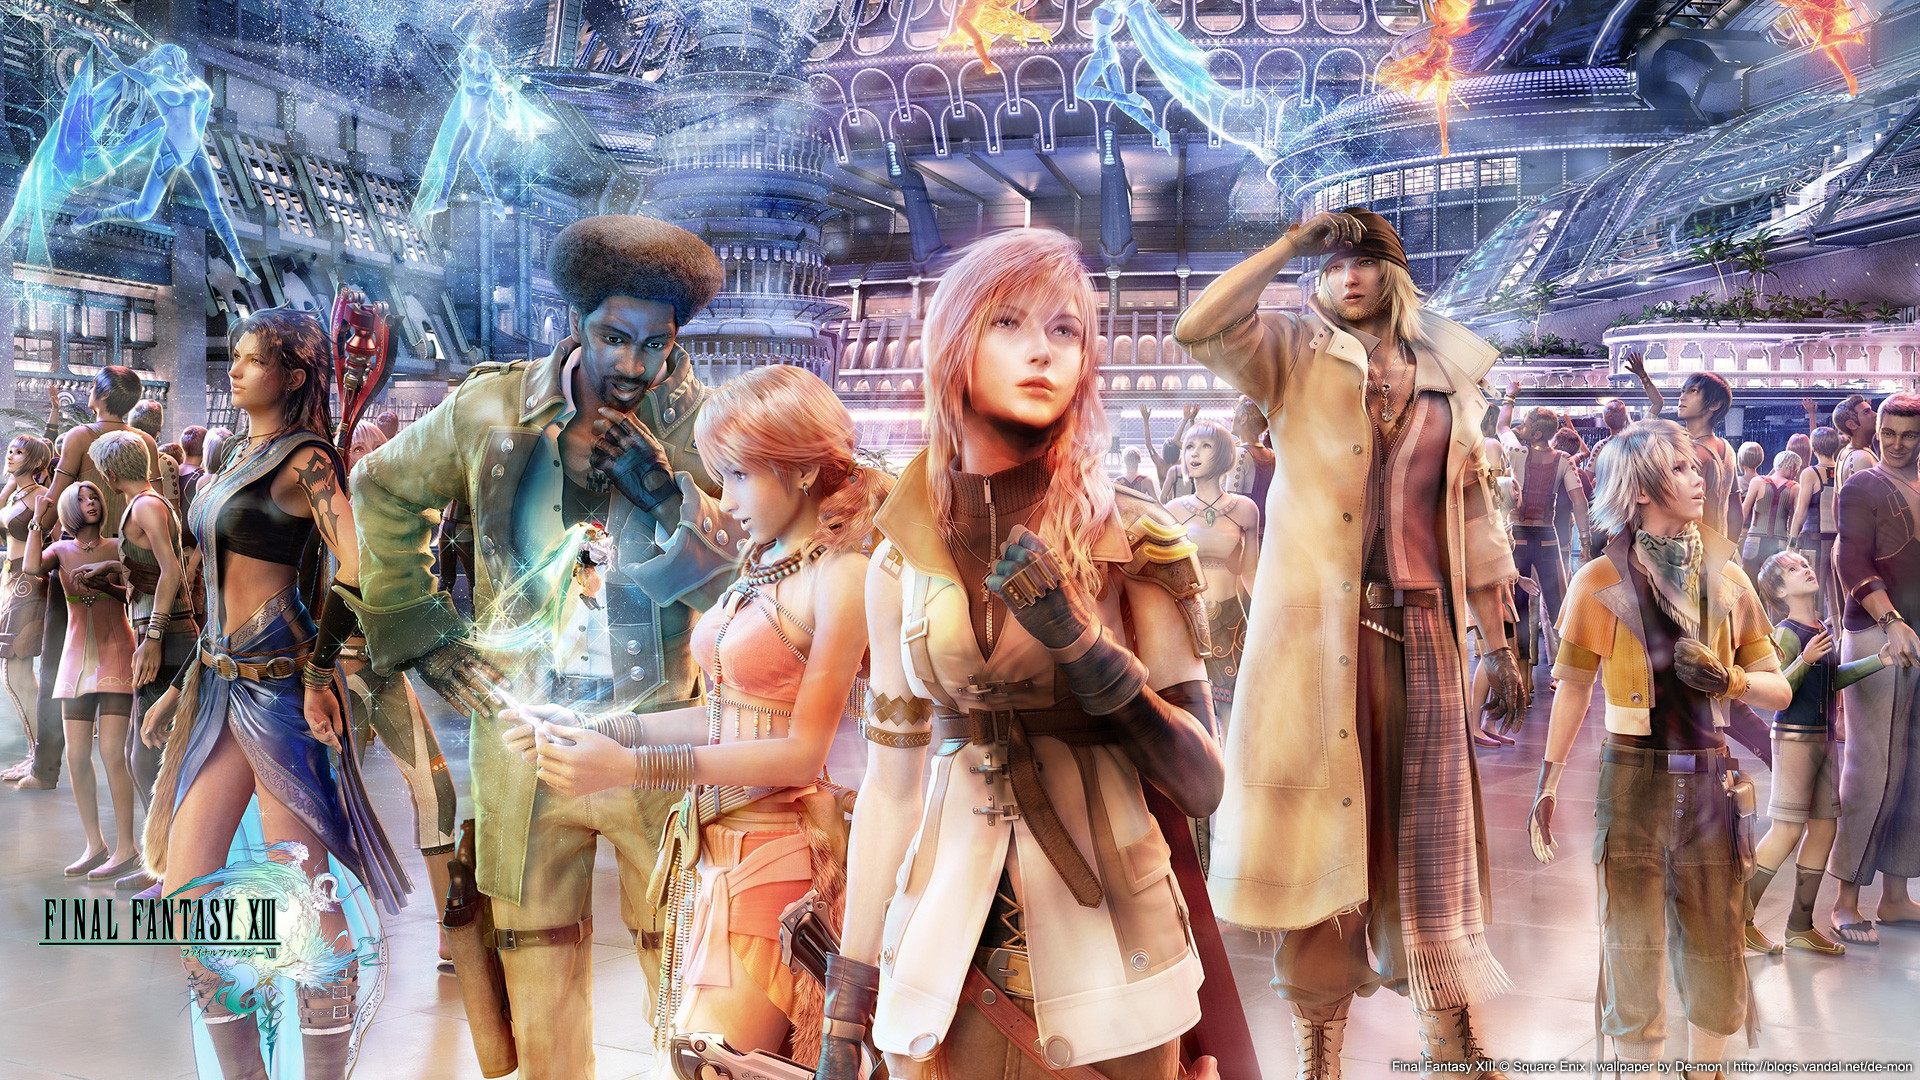 Final Fantasy Xiii HD Wallpapers Backgrounds